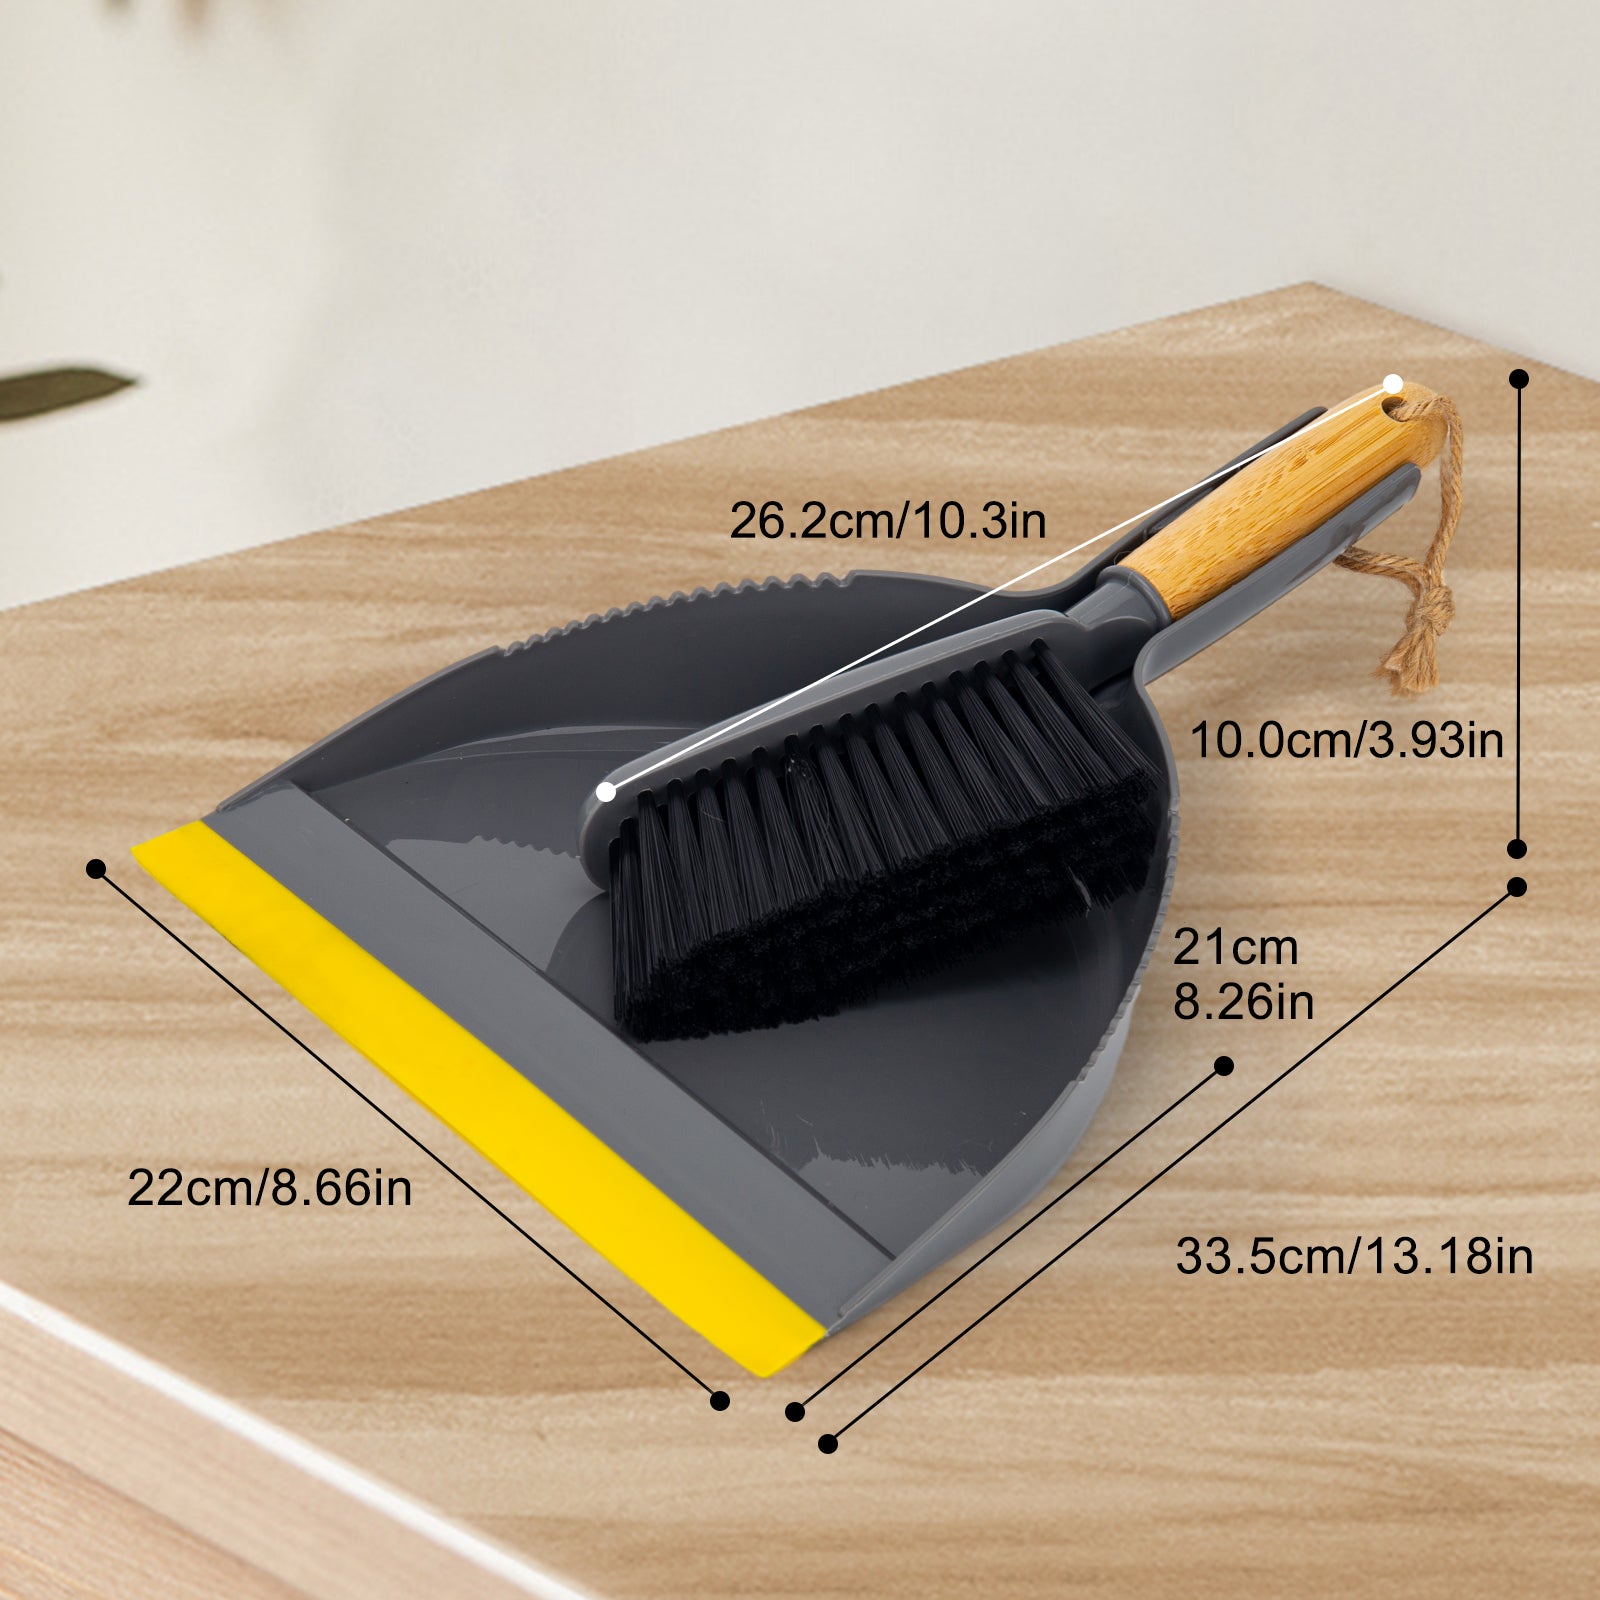 Small Broom and Dustpan Set,Mini Handheld Dust pan with Cleaning